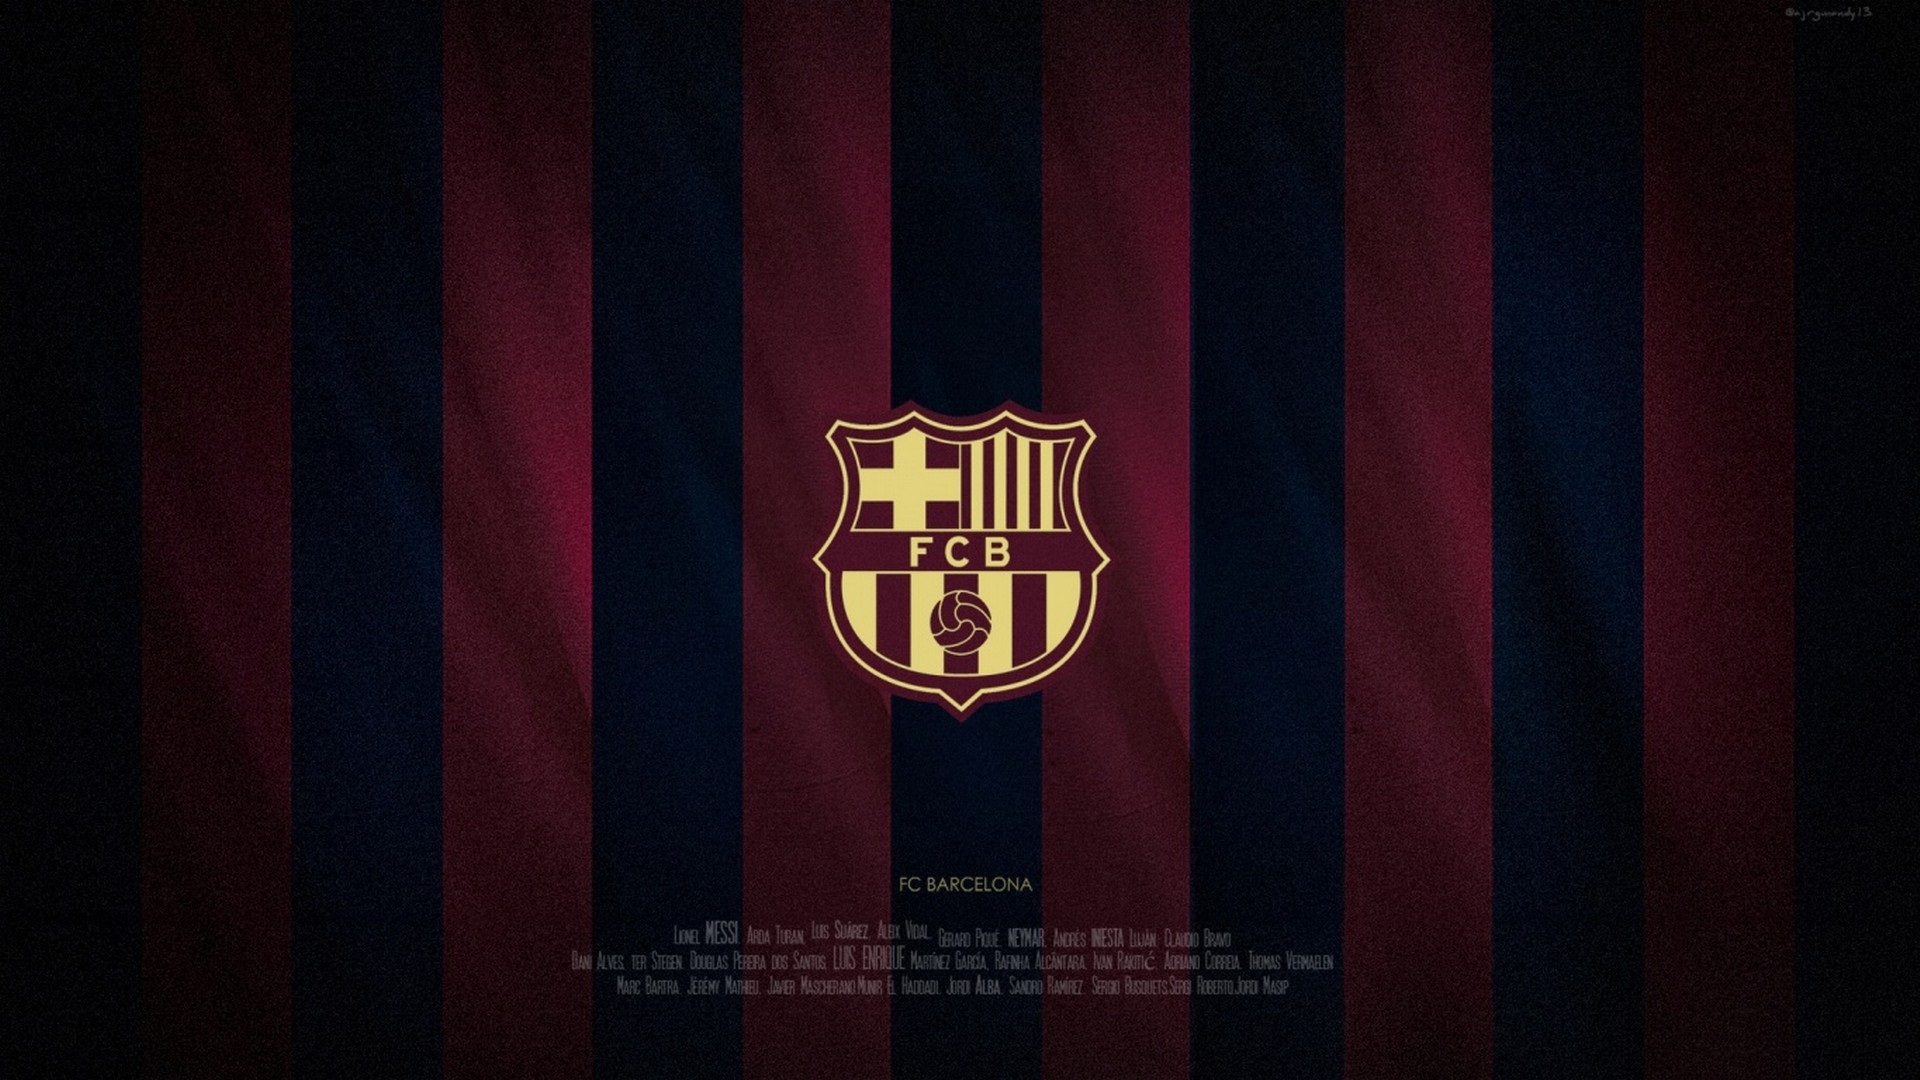 HD Desktop Wallpaper Barca with high-resolution 1920x1080 pixel. You can use this wallpaper for your Desktop Computers, Mac Screensavers, Windows Backgrounds, iPhone Wallpapers, Tablet or Android Lock screen and another Mobile device